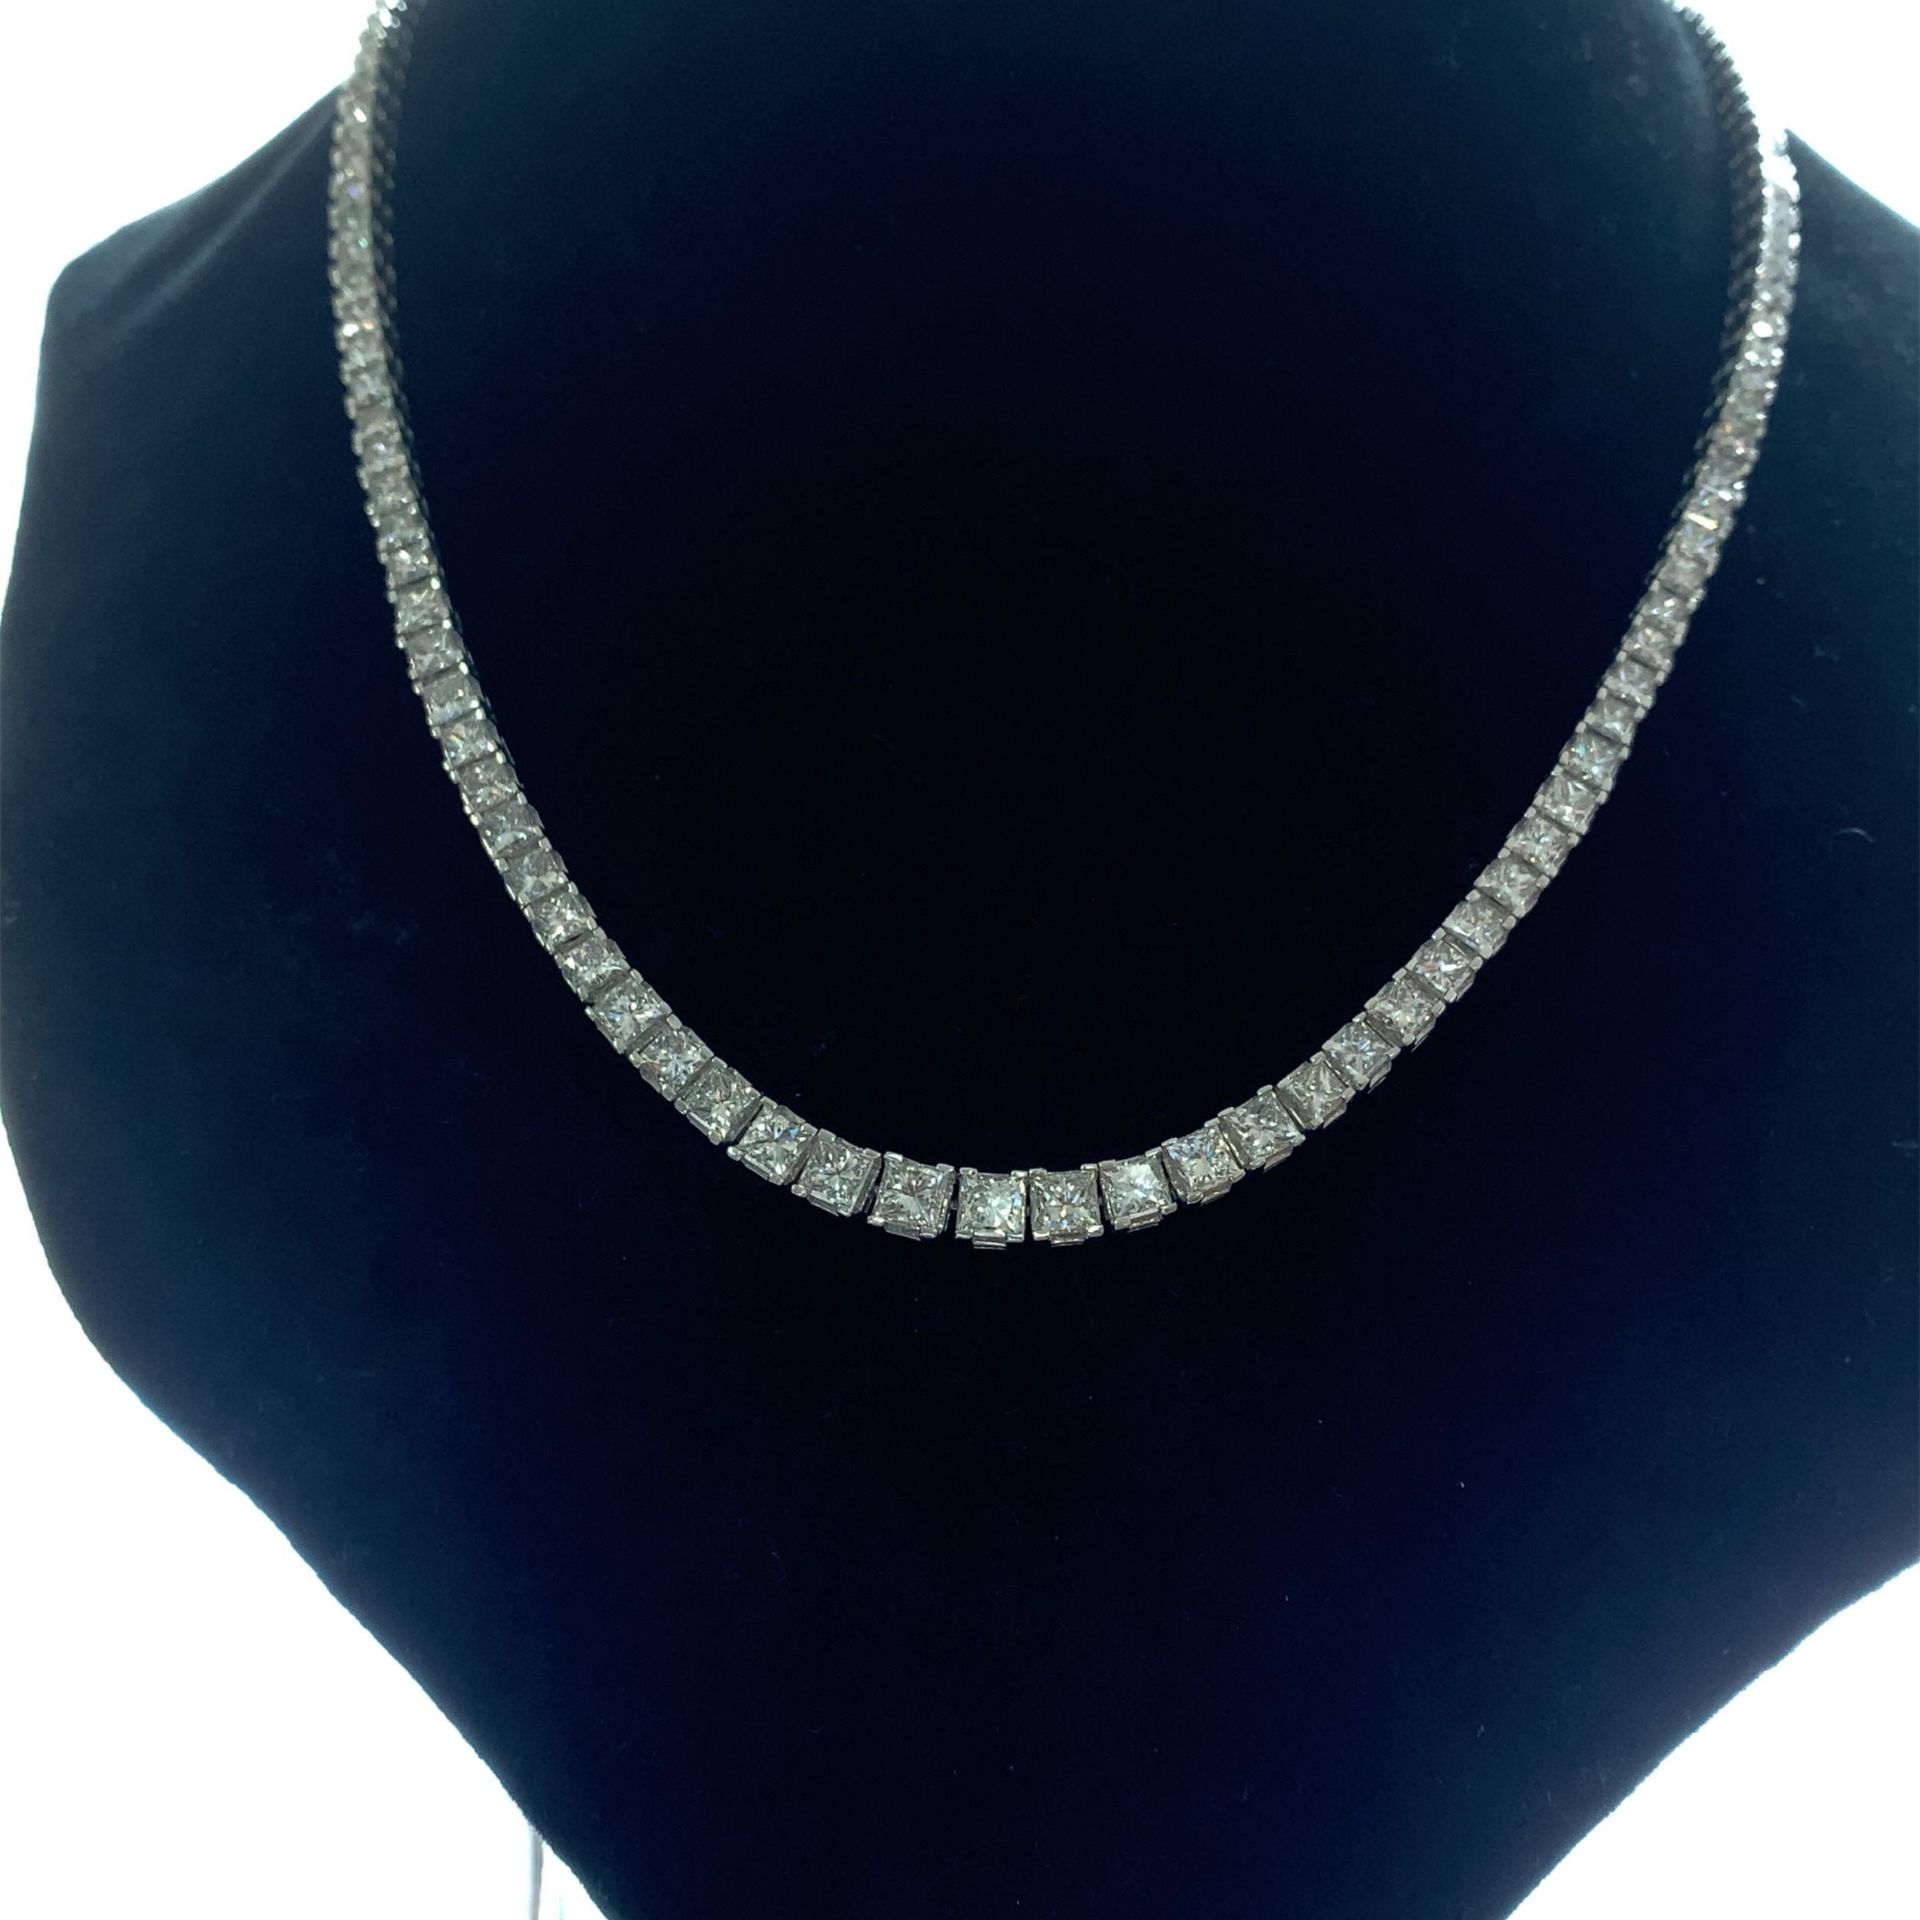 A spectacular 15.72ct princess cut diamond necklace in 18k white gold, 44cm length, brand new - Image 5 of 5